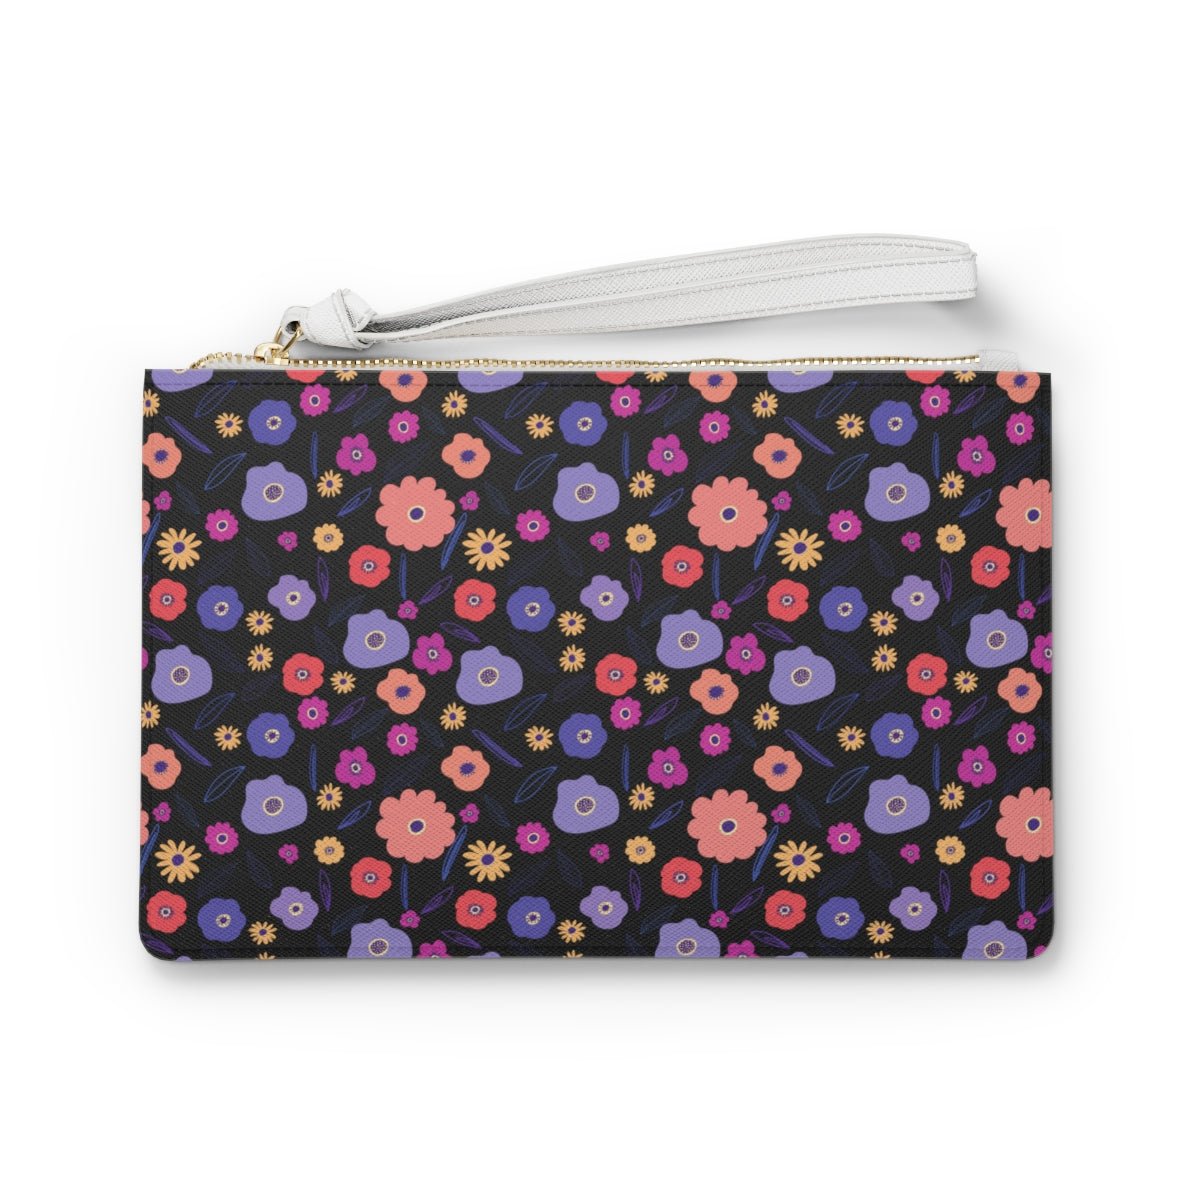 Keep Going Keep Growing Floral Wristlet Clutch Bag - The Kindness Cause